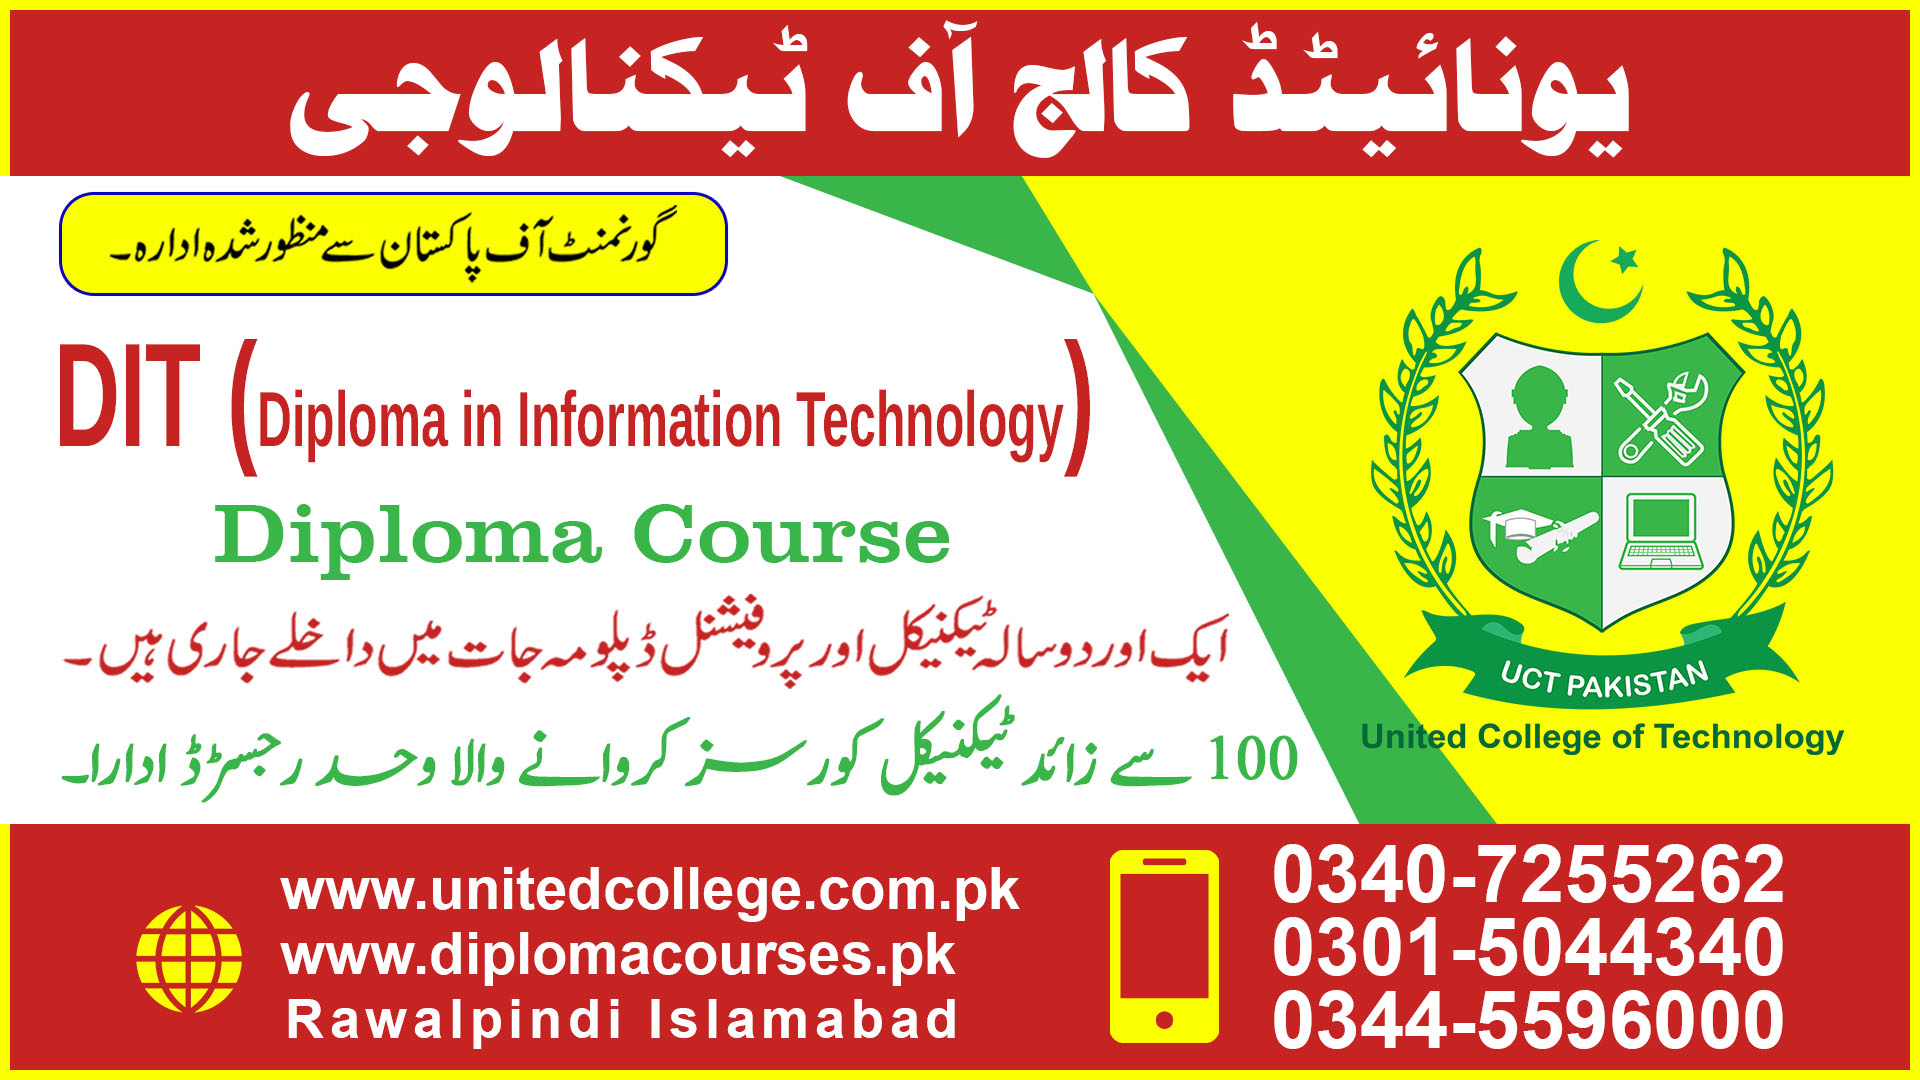 DIT (DIPLOMA IN INFORMATION TECHNOLOGY) COURSE IN PAKISTAN